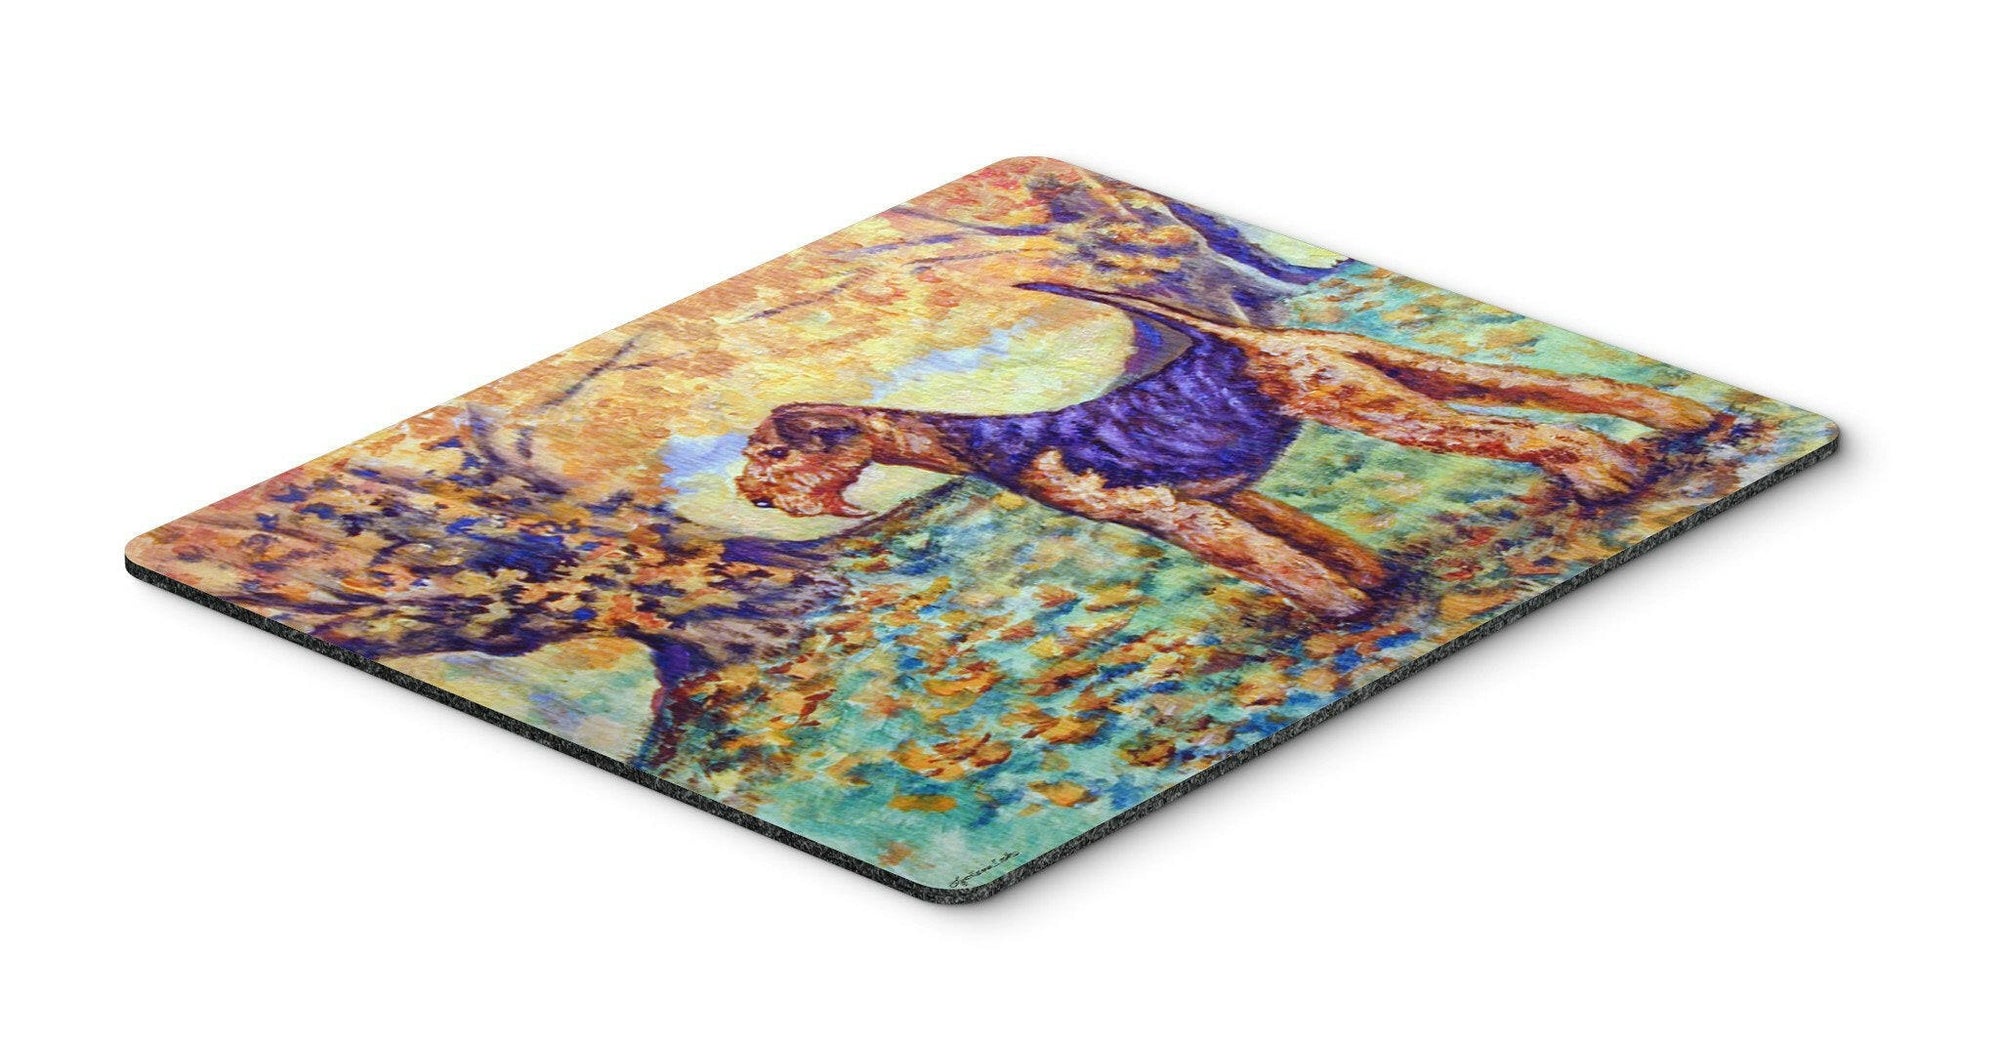 Autumn Airedale Terrier Mouse Pad, Hot Pad or Trivet 7343MP by Caroline's Treasures